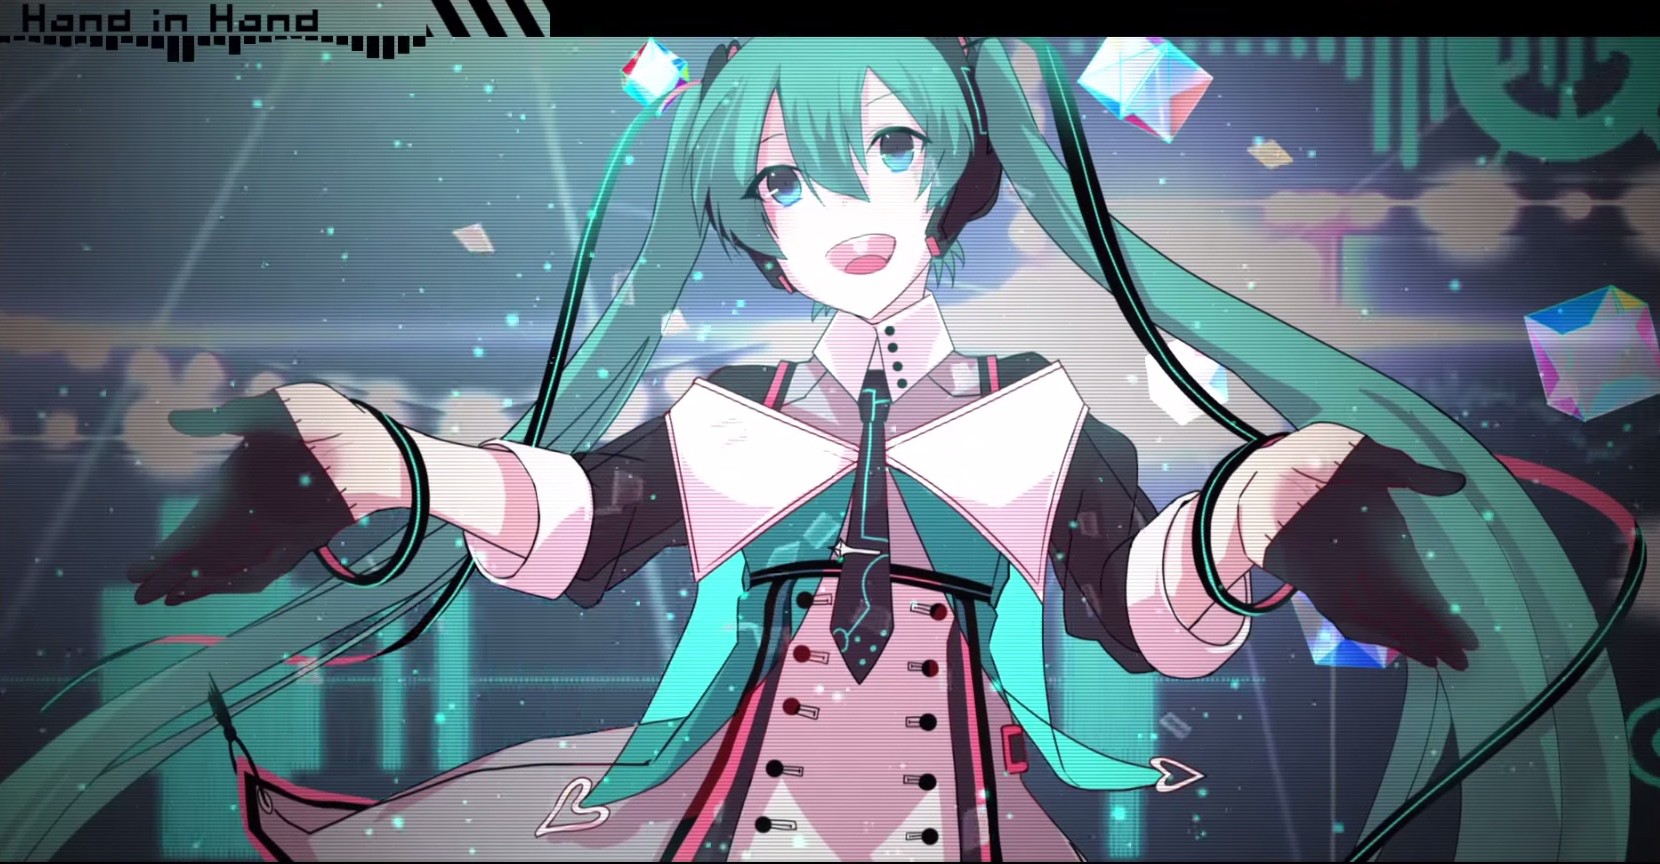 Greatest Miku-Song Ever? Full-Length MV for “Hand in Hand” Composed by kz (livetune) Unveiled!